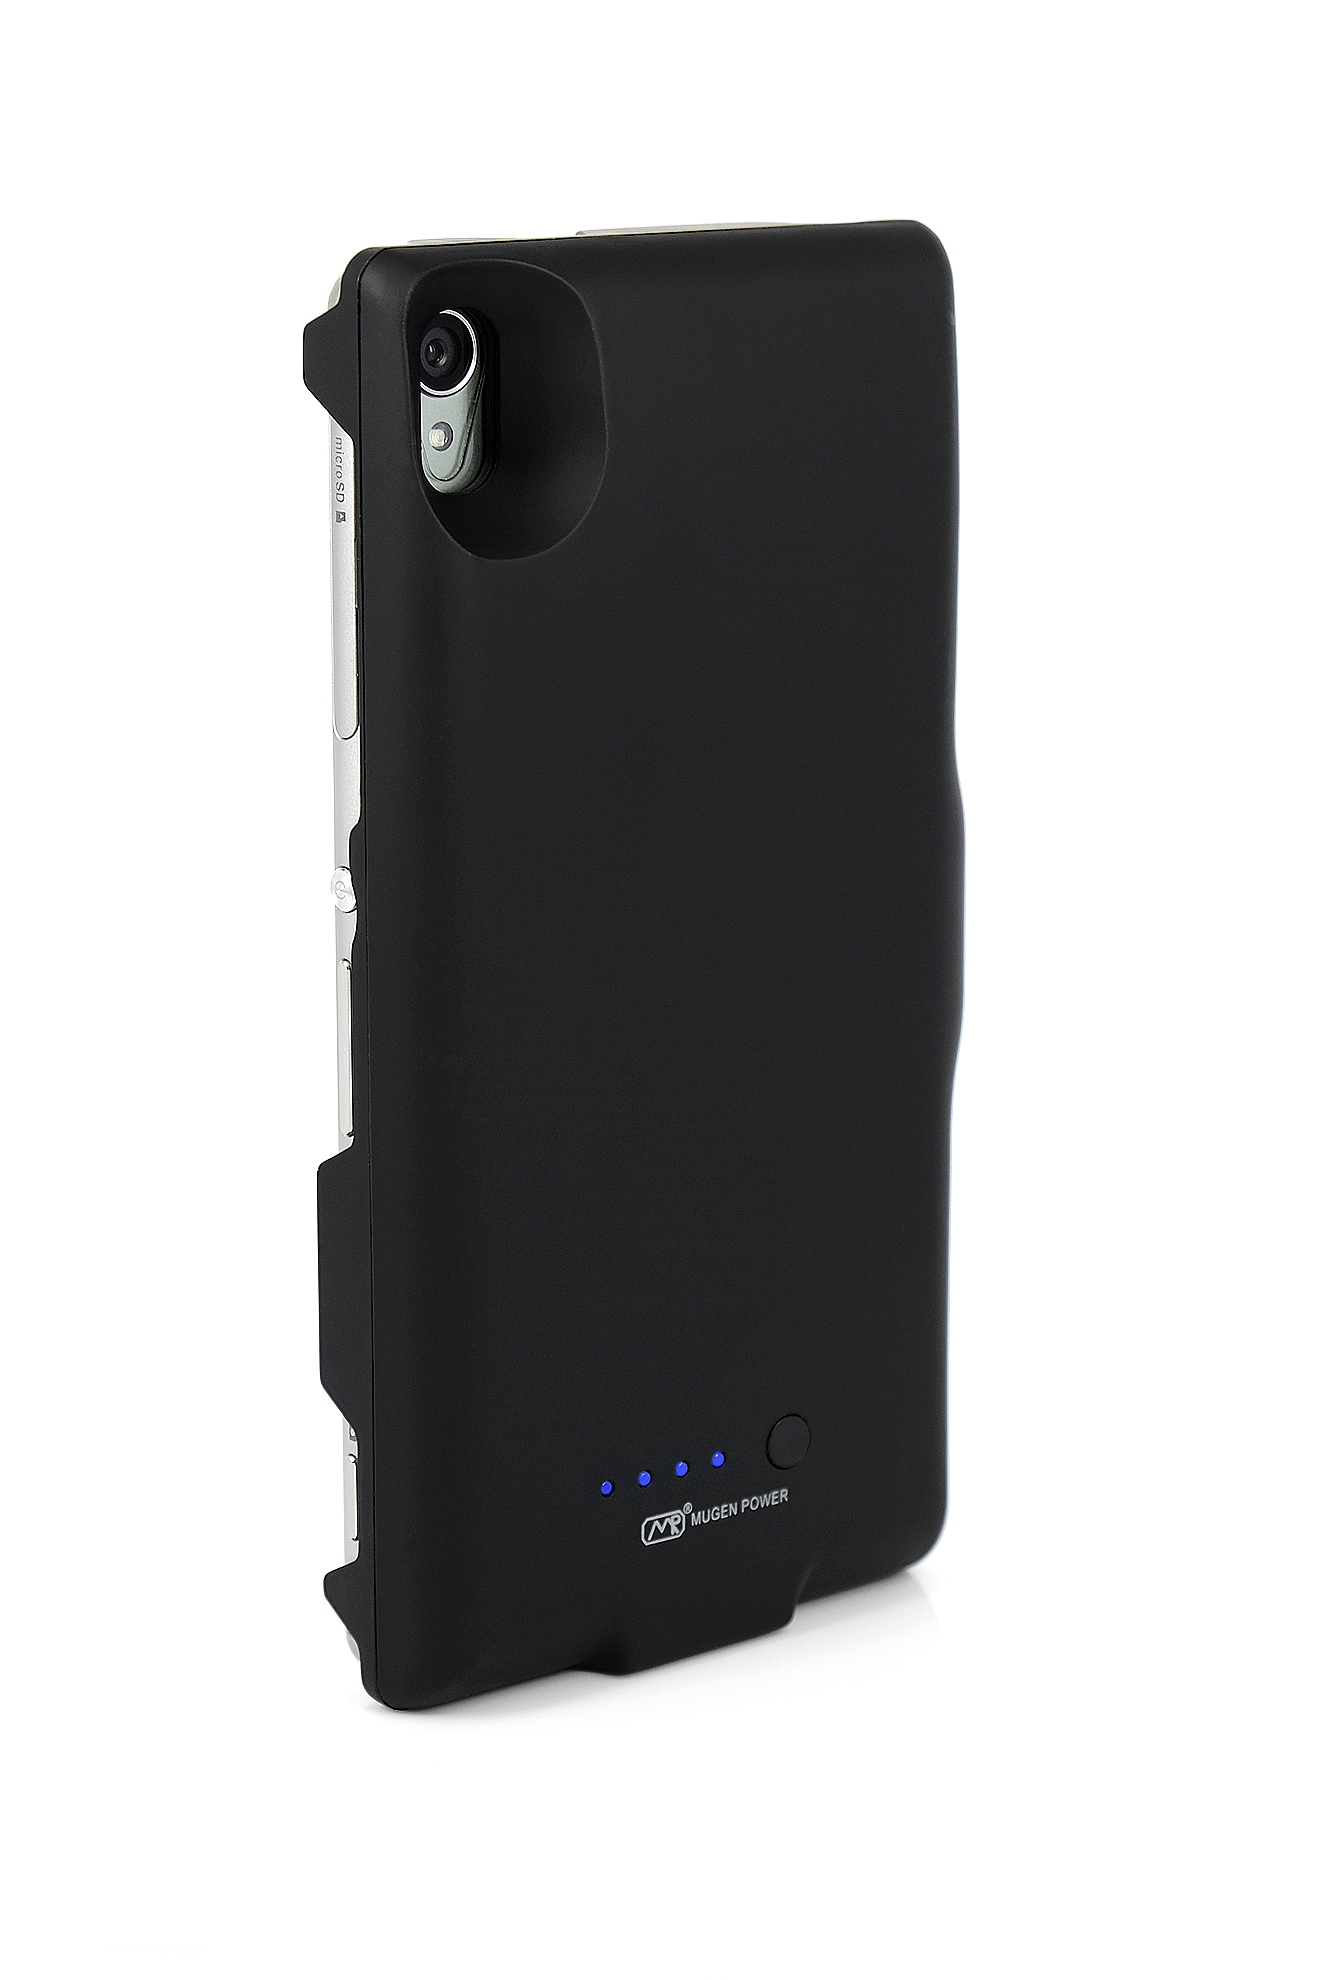 Xperia Z3 Extended Battery Case